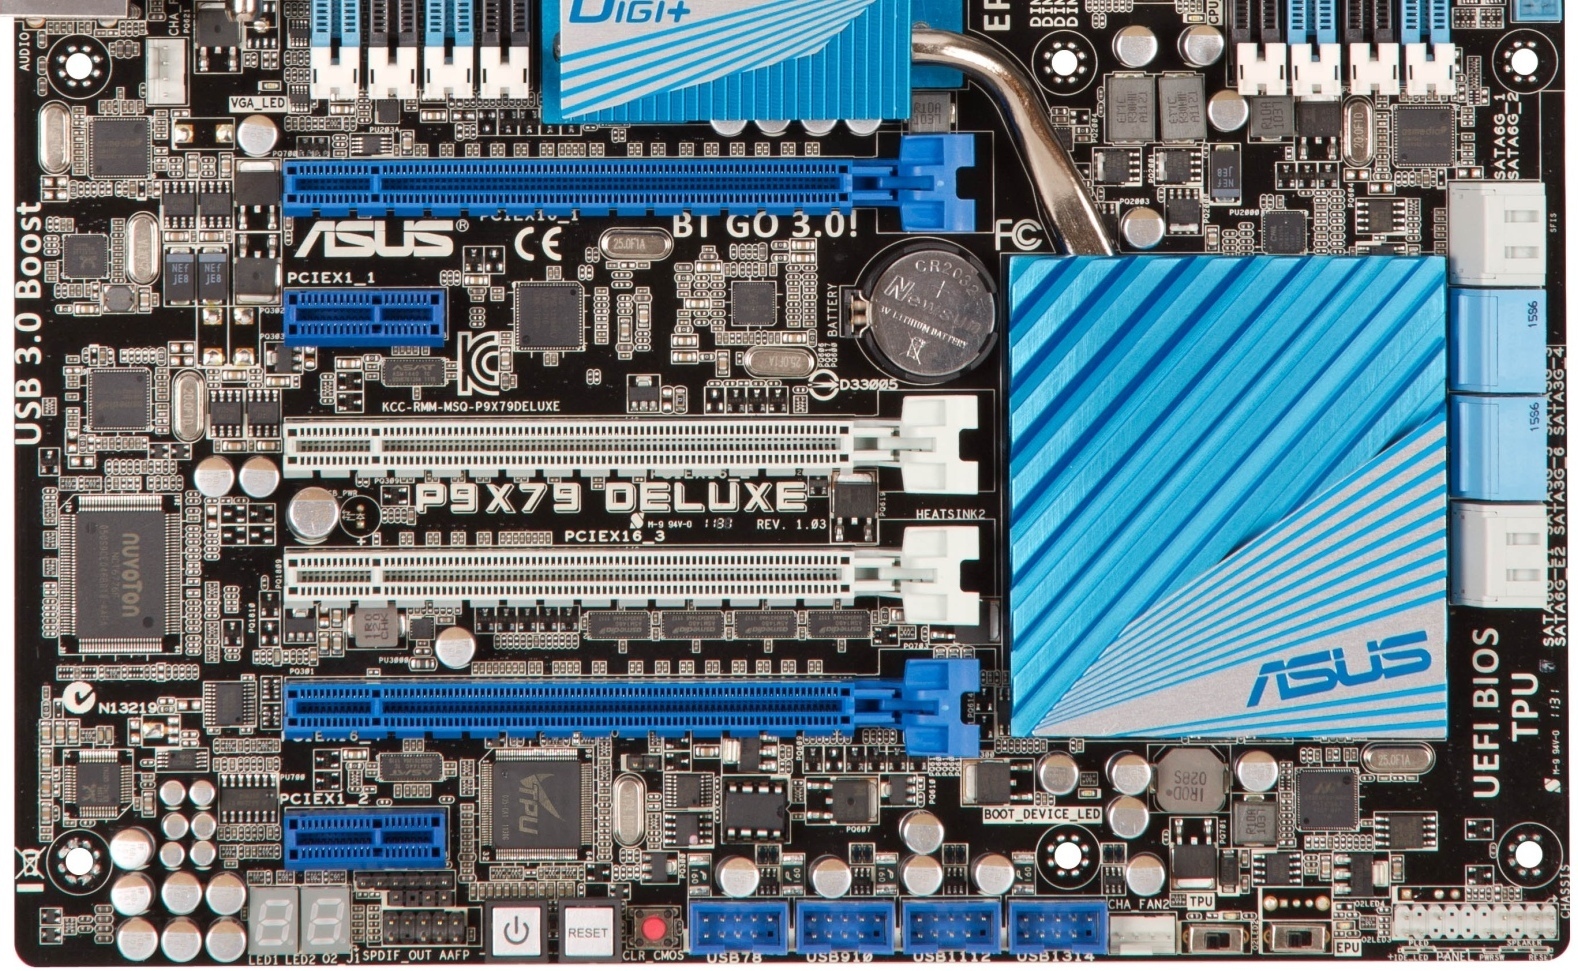 Is there AMD motherboard with 2 x PCIe 3.0 x16 slots and 3.0 x1 